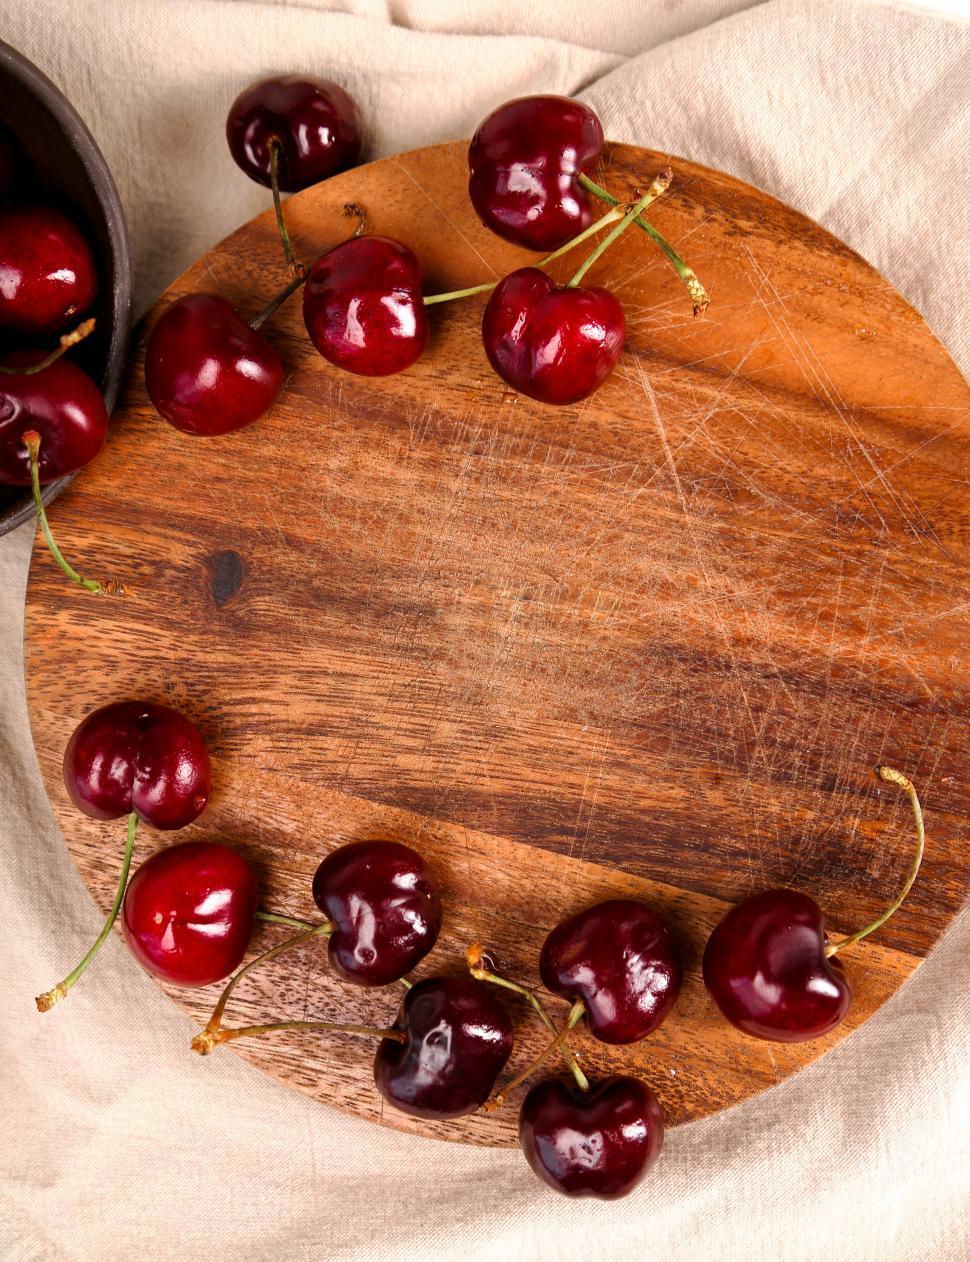 Free Image of Cherries on a wooden cutting board with middle copyspace 